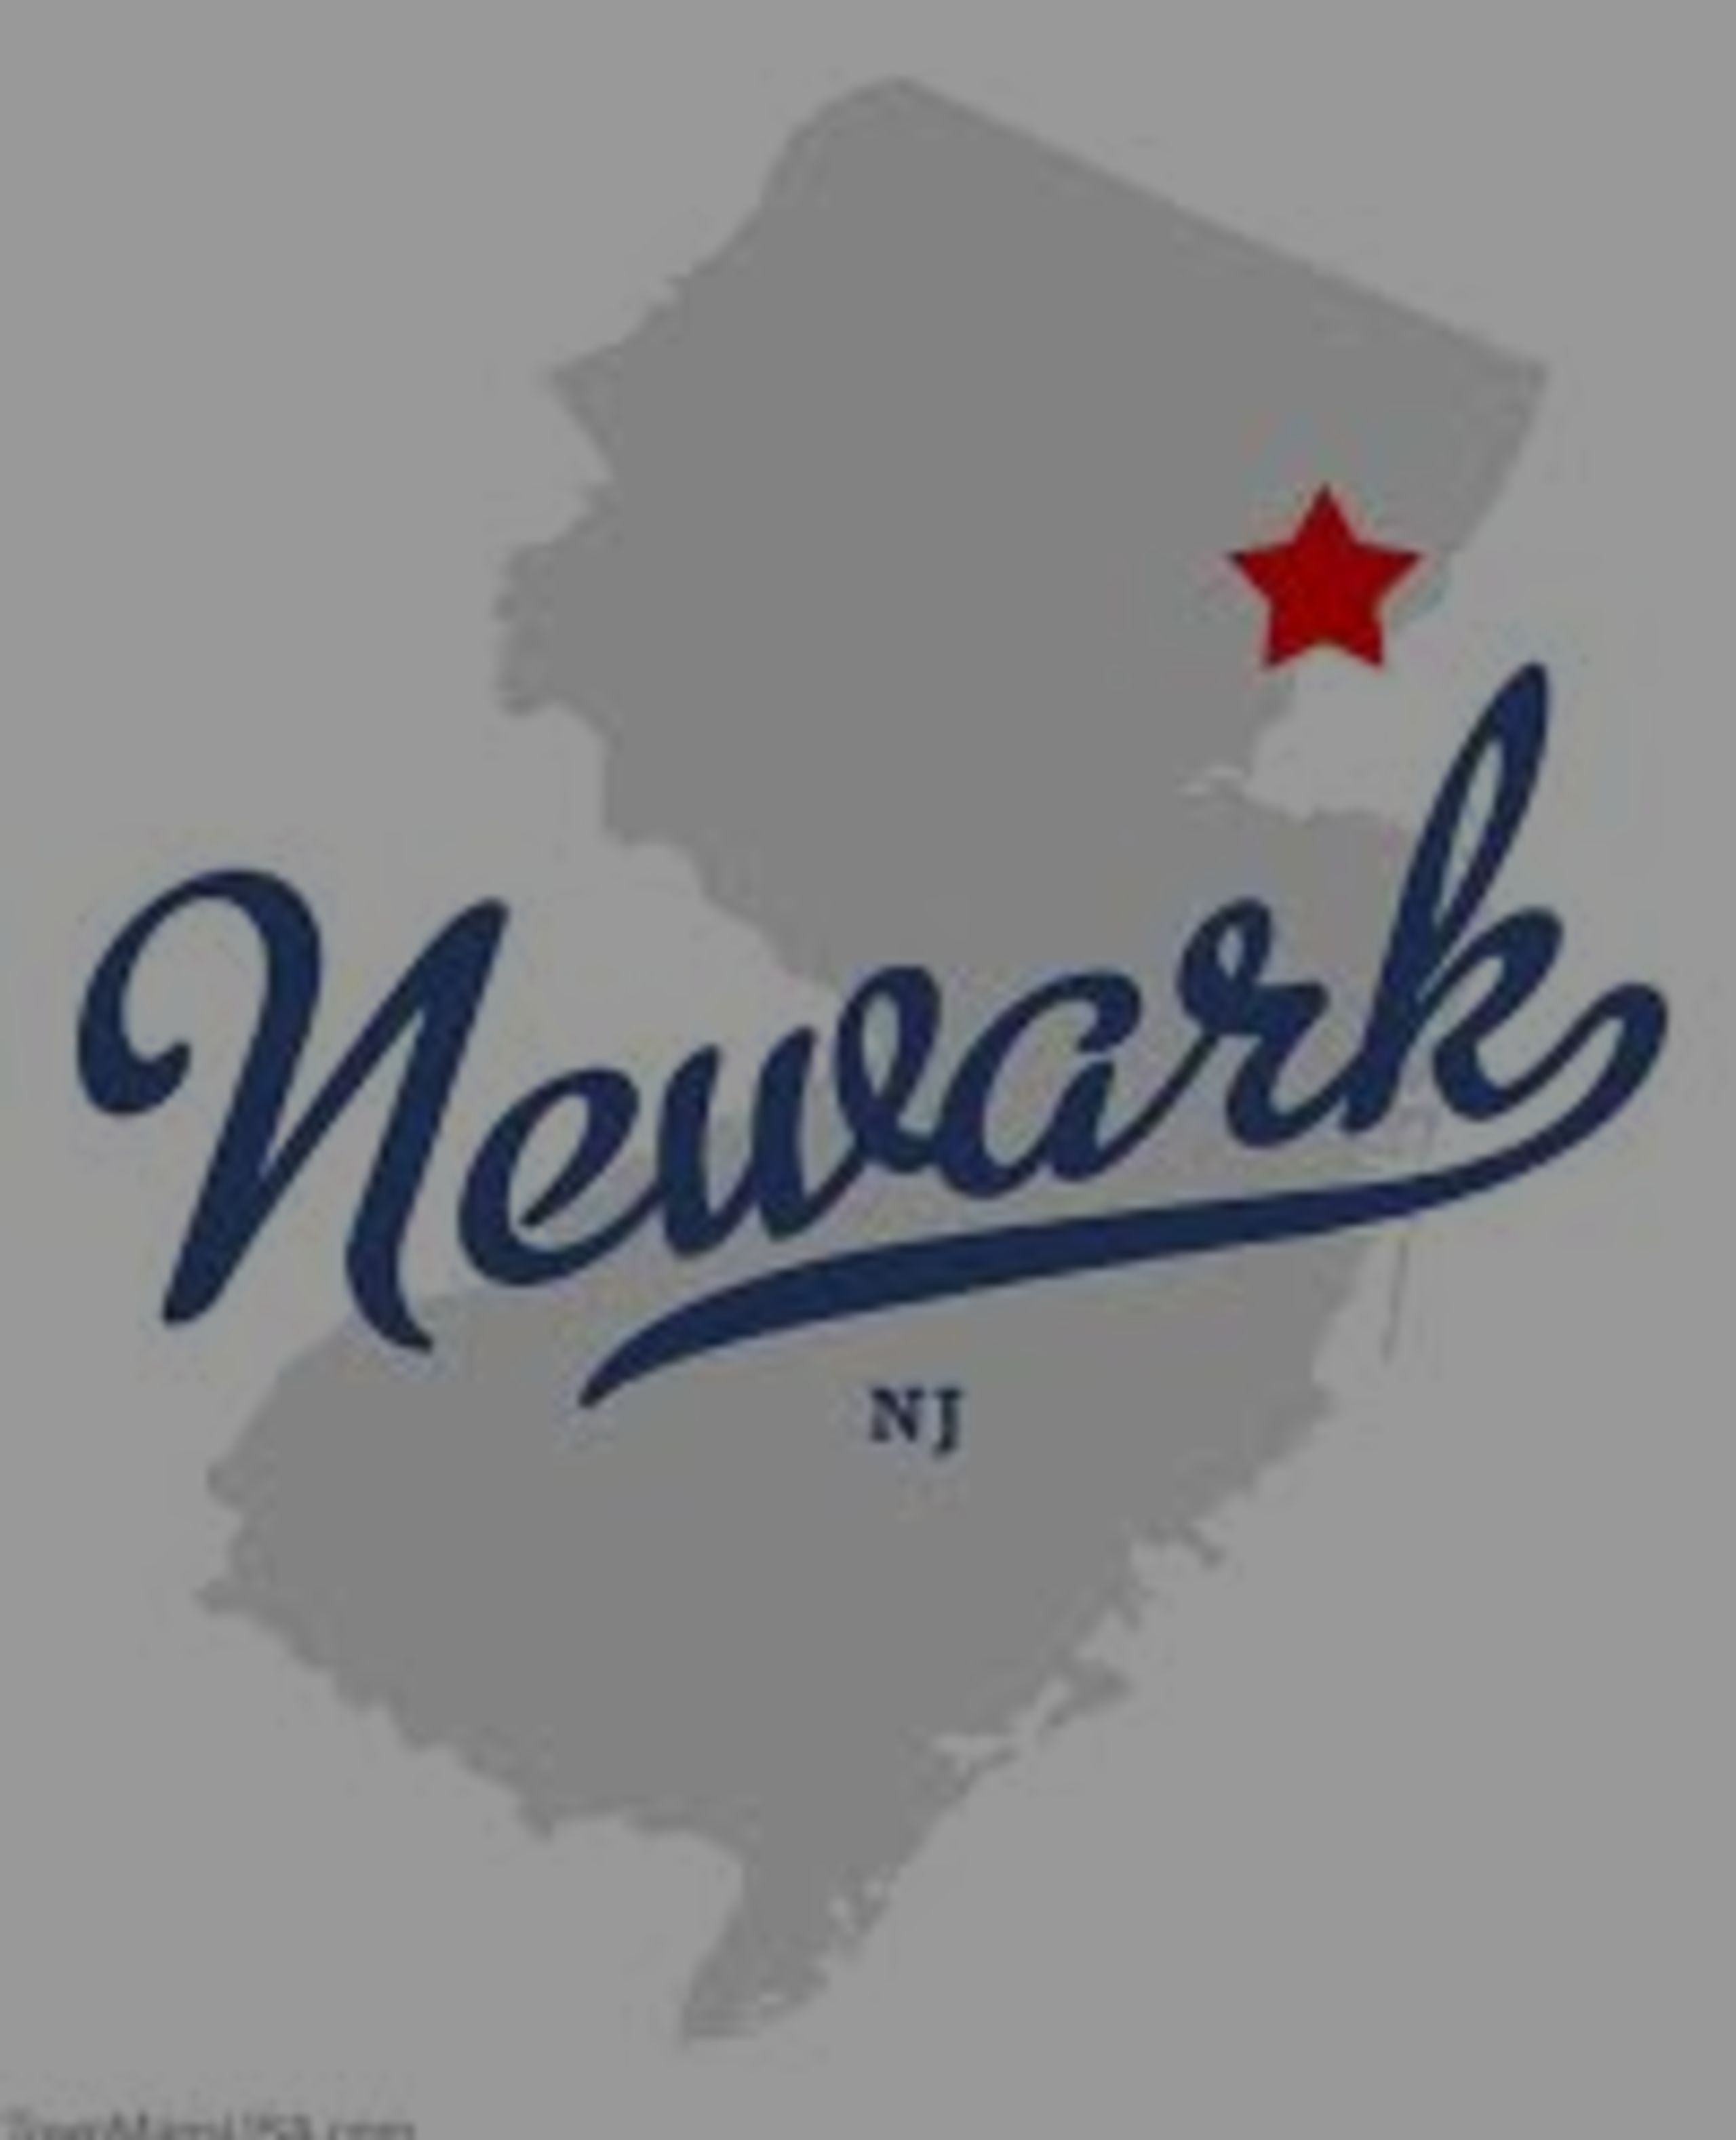 Why are so many people moving from New York to Newark?